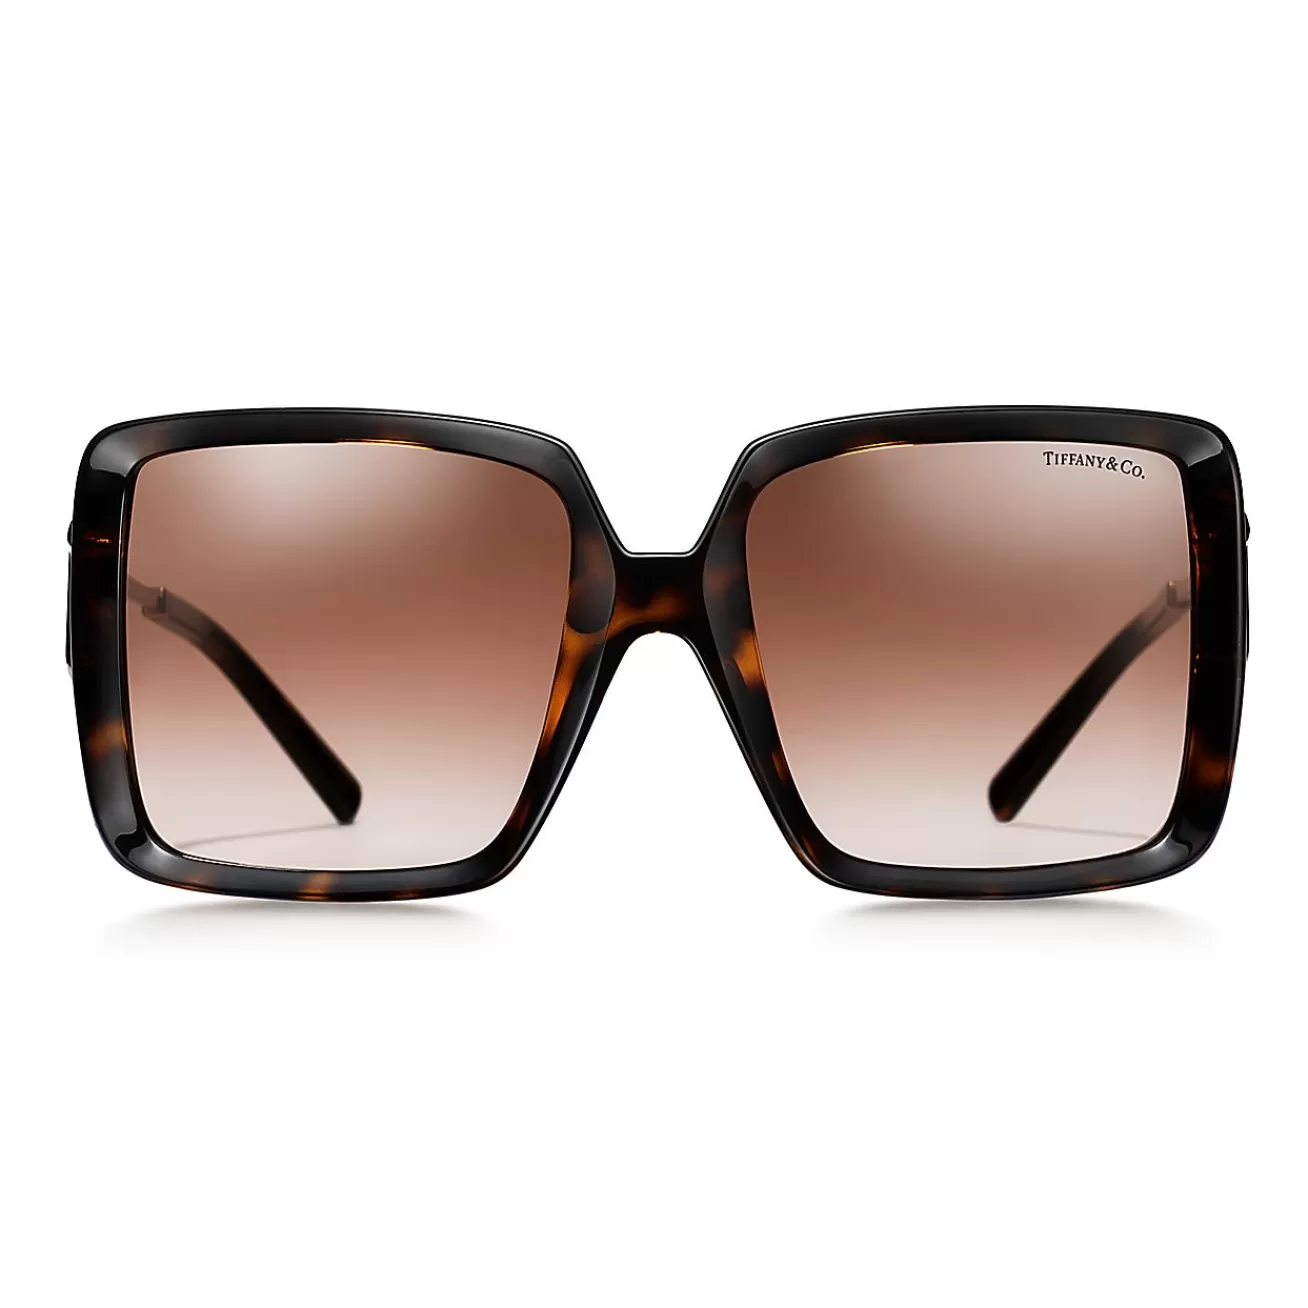 Tiffany & Co. Tiffany T Sunglasses in Tortoise Acetate with Brown Gradient Lenses | ^Women Tiffany T | Sunglasses